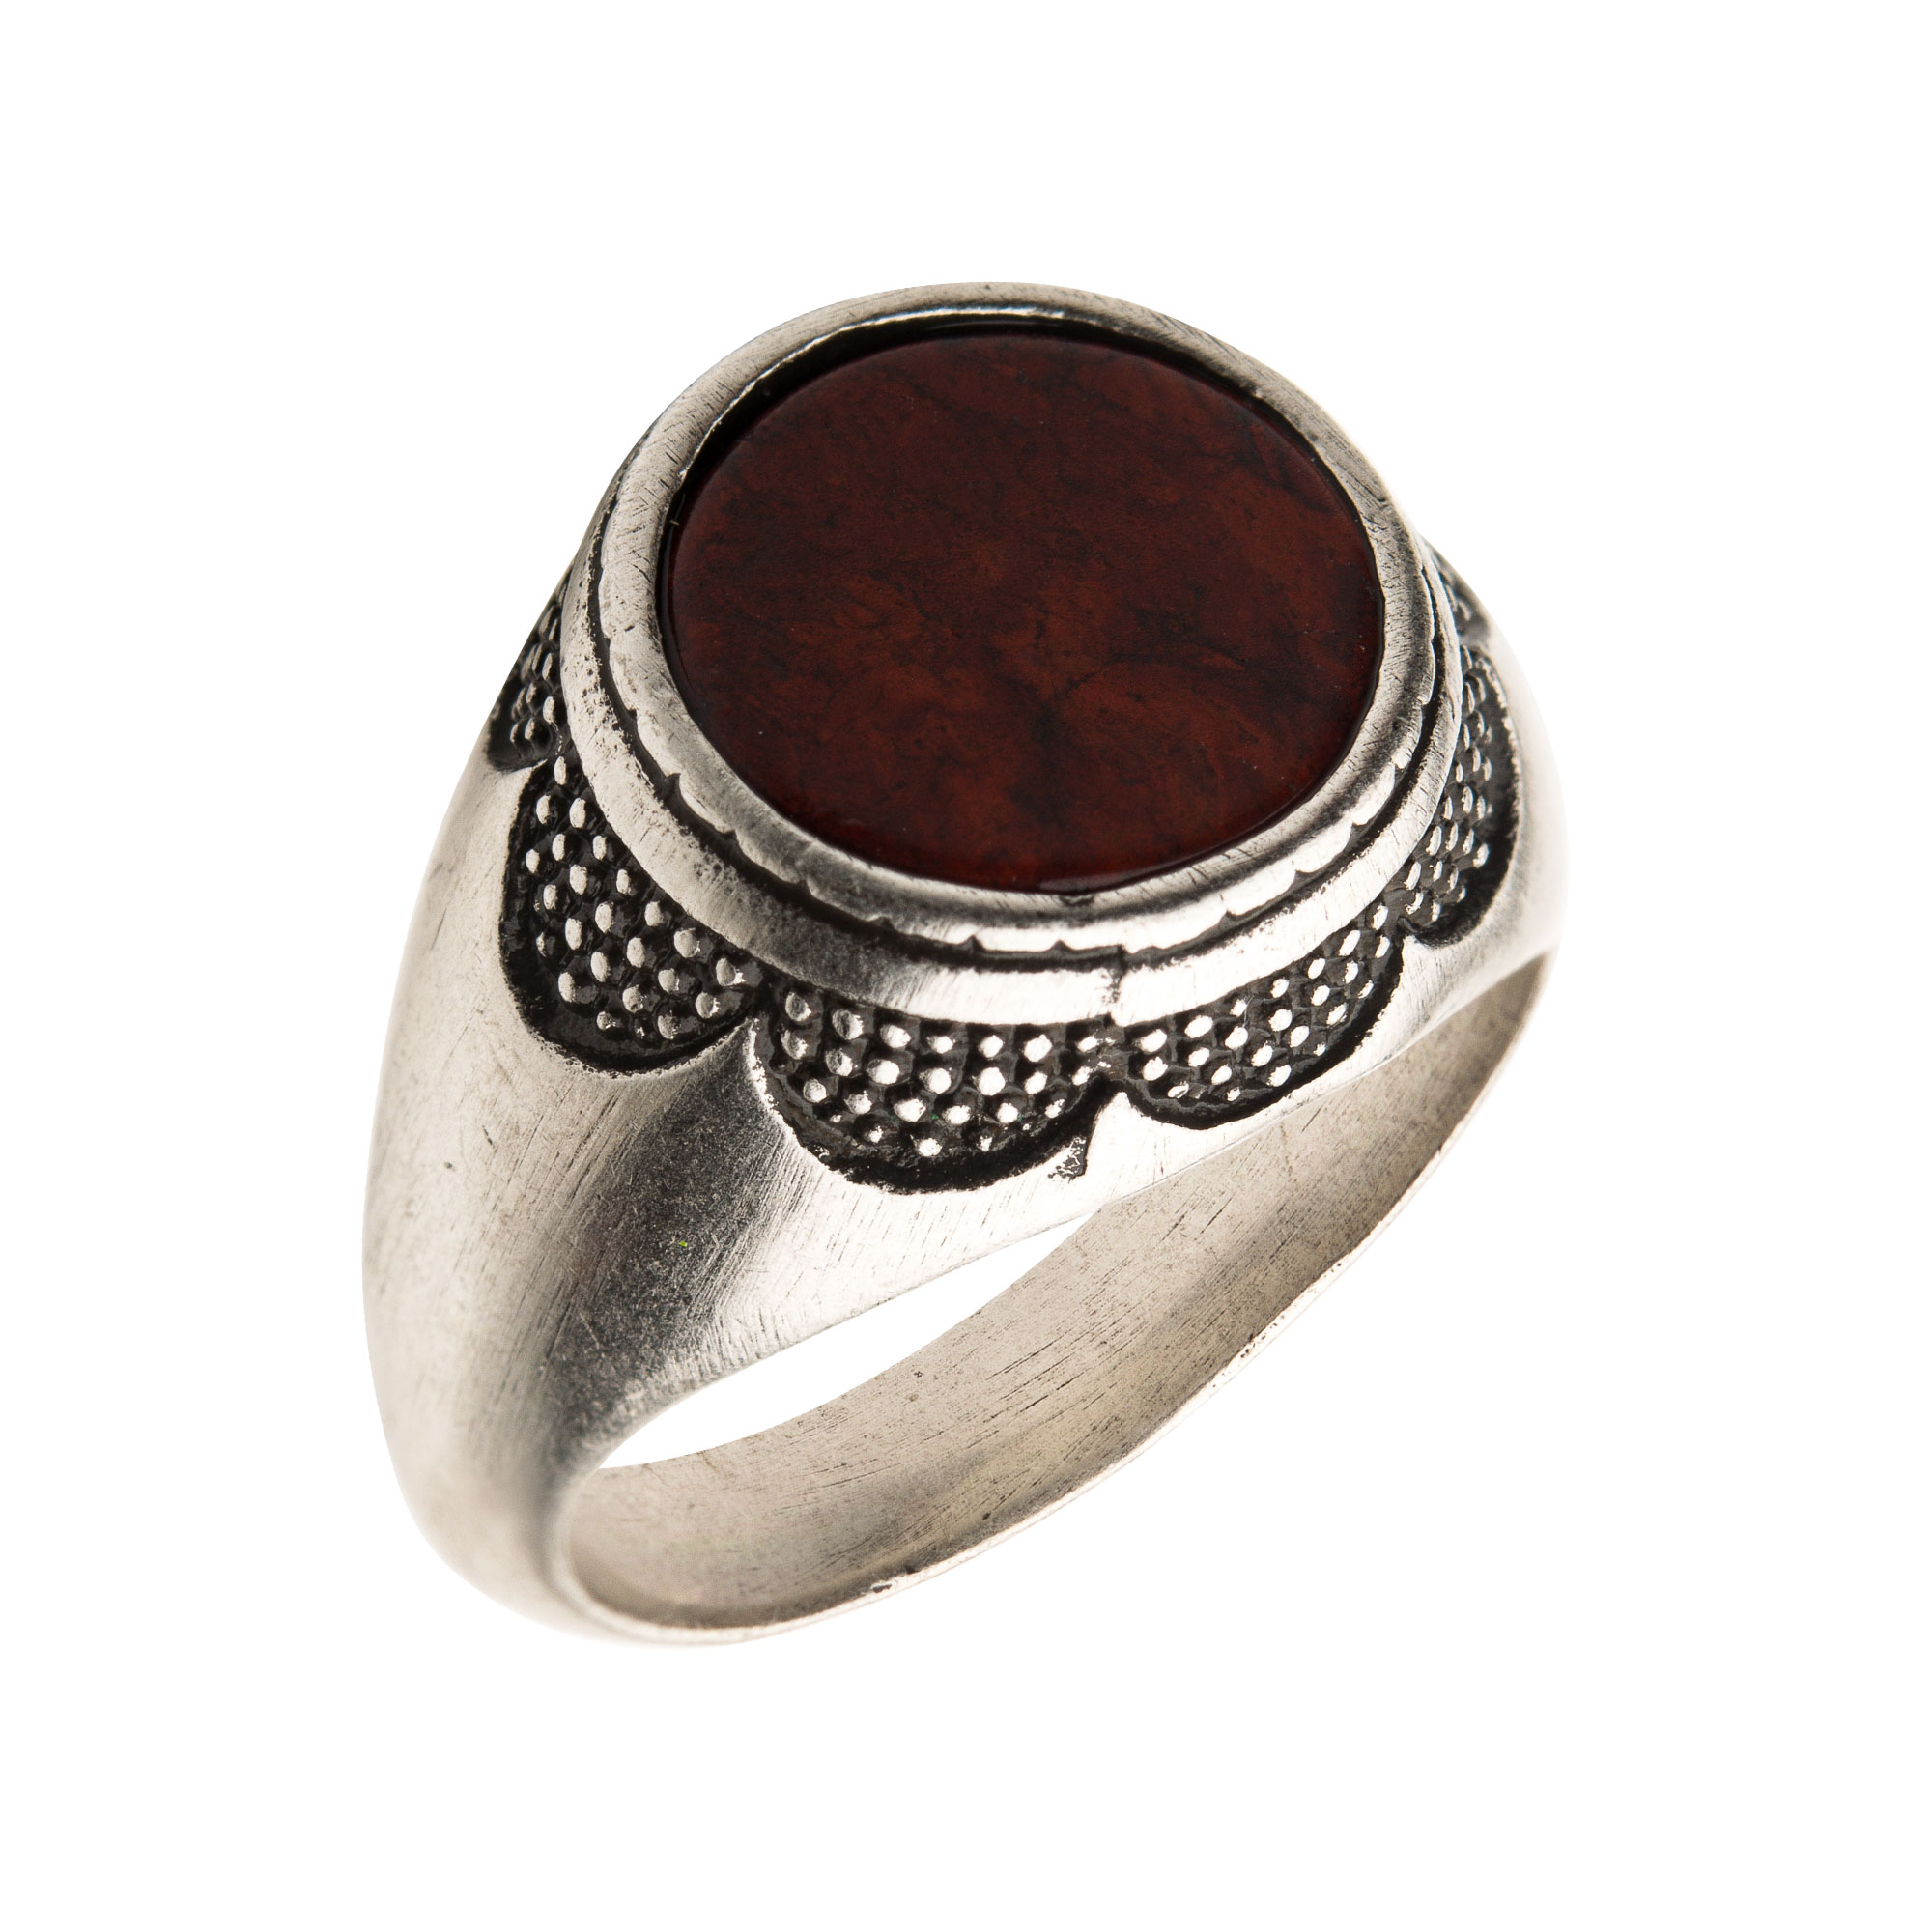 Stainless Steel Silver Plated with Red Jasper Stone Ring Carroll / Ochs Jewelers Monroe, MI